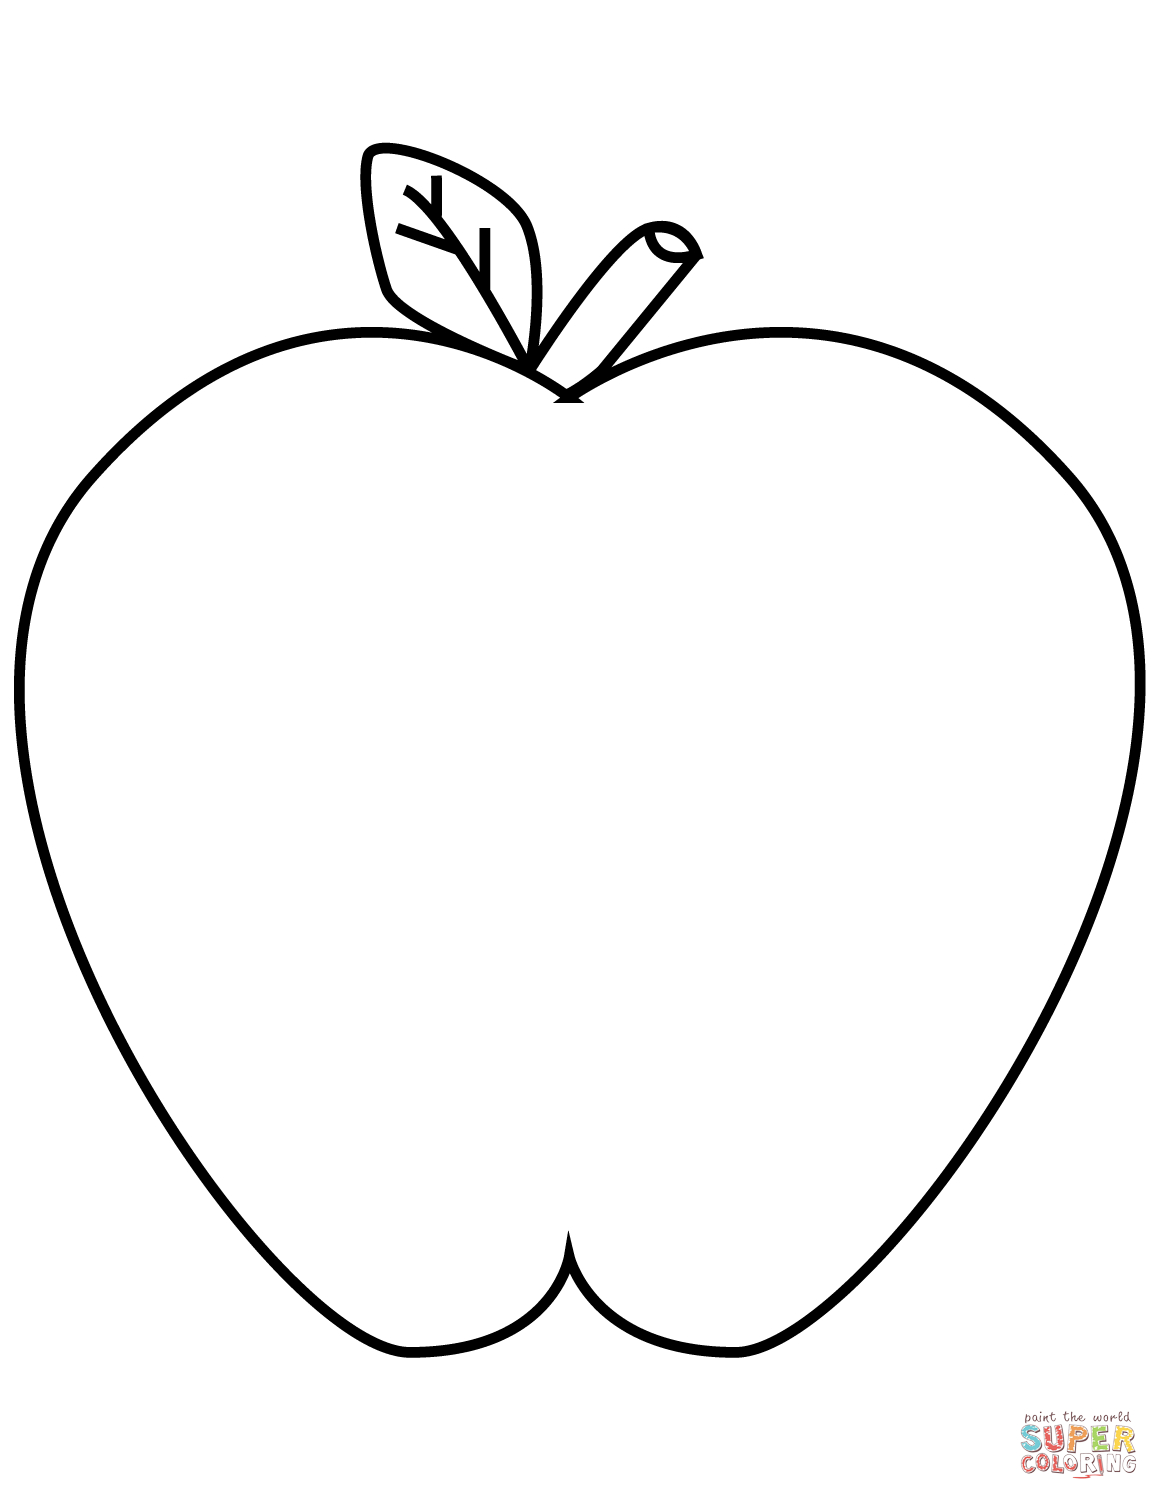 Printable Apple Coloring Pages Apples Coloring Pages Free Coloring Pages